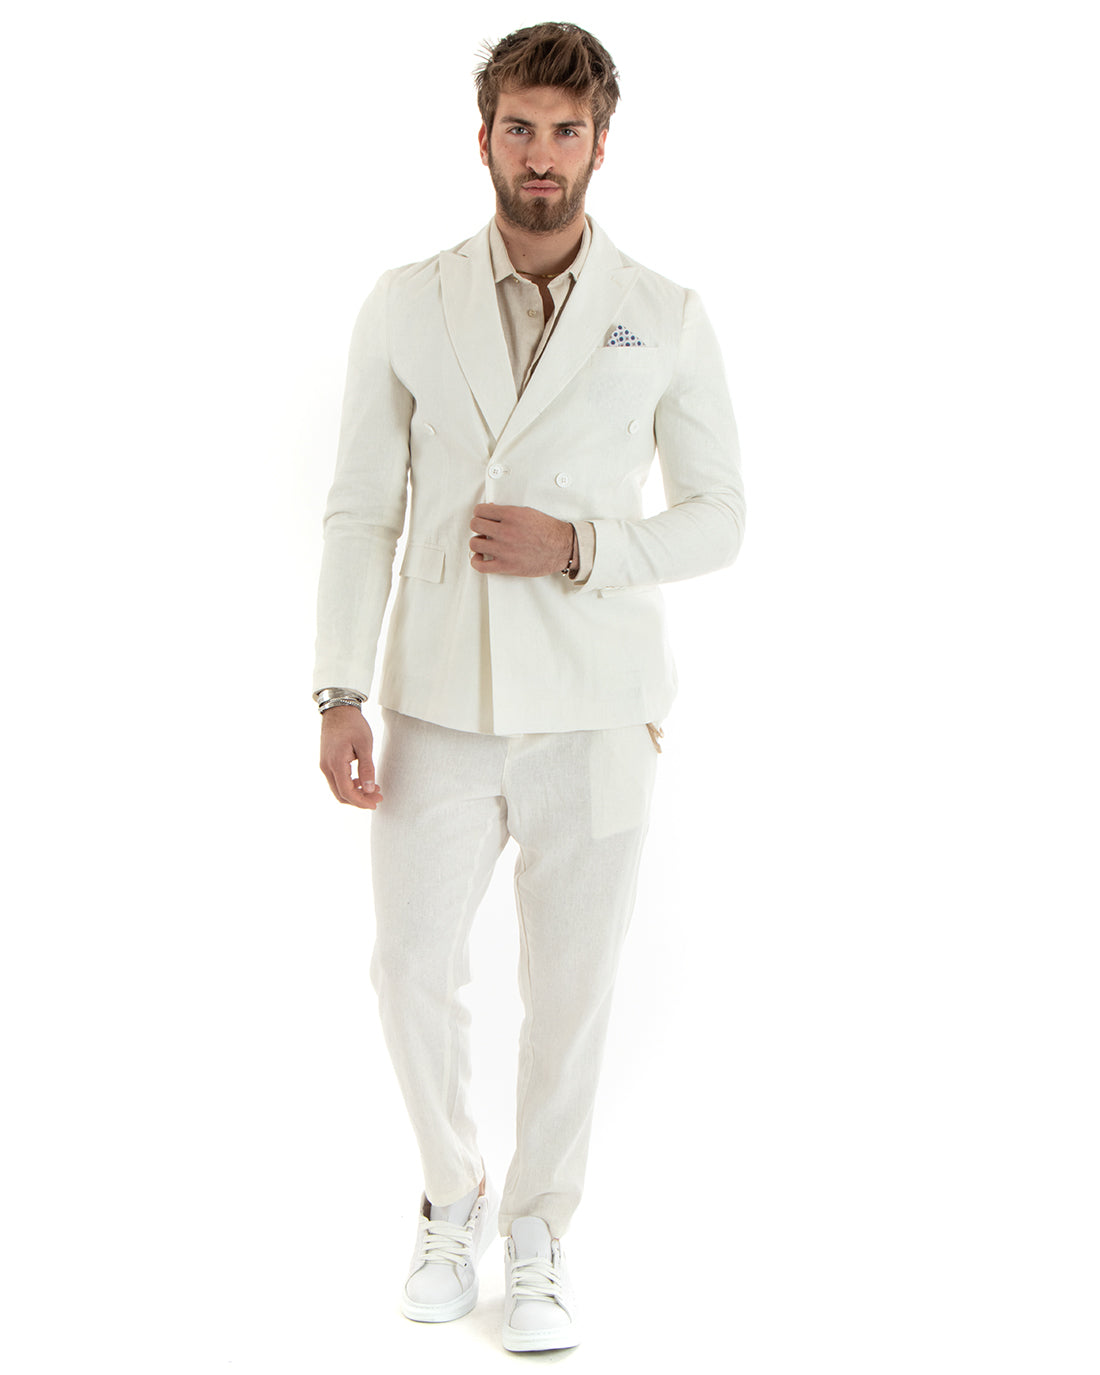 Double-Breasted Men's Suit Tailored Linen Suit Jacket Trousers Solid Color Cream GIOSAL-OU2333A